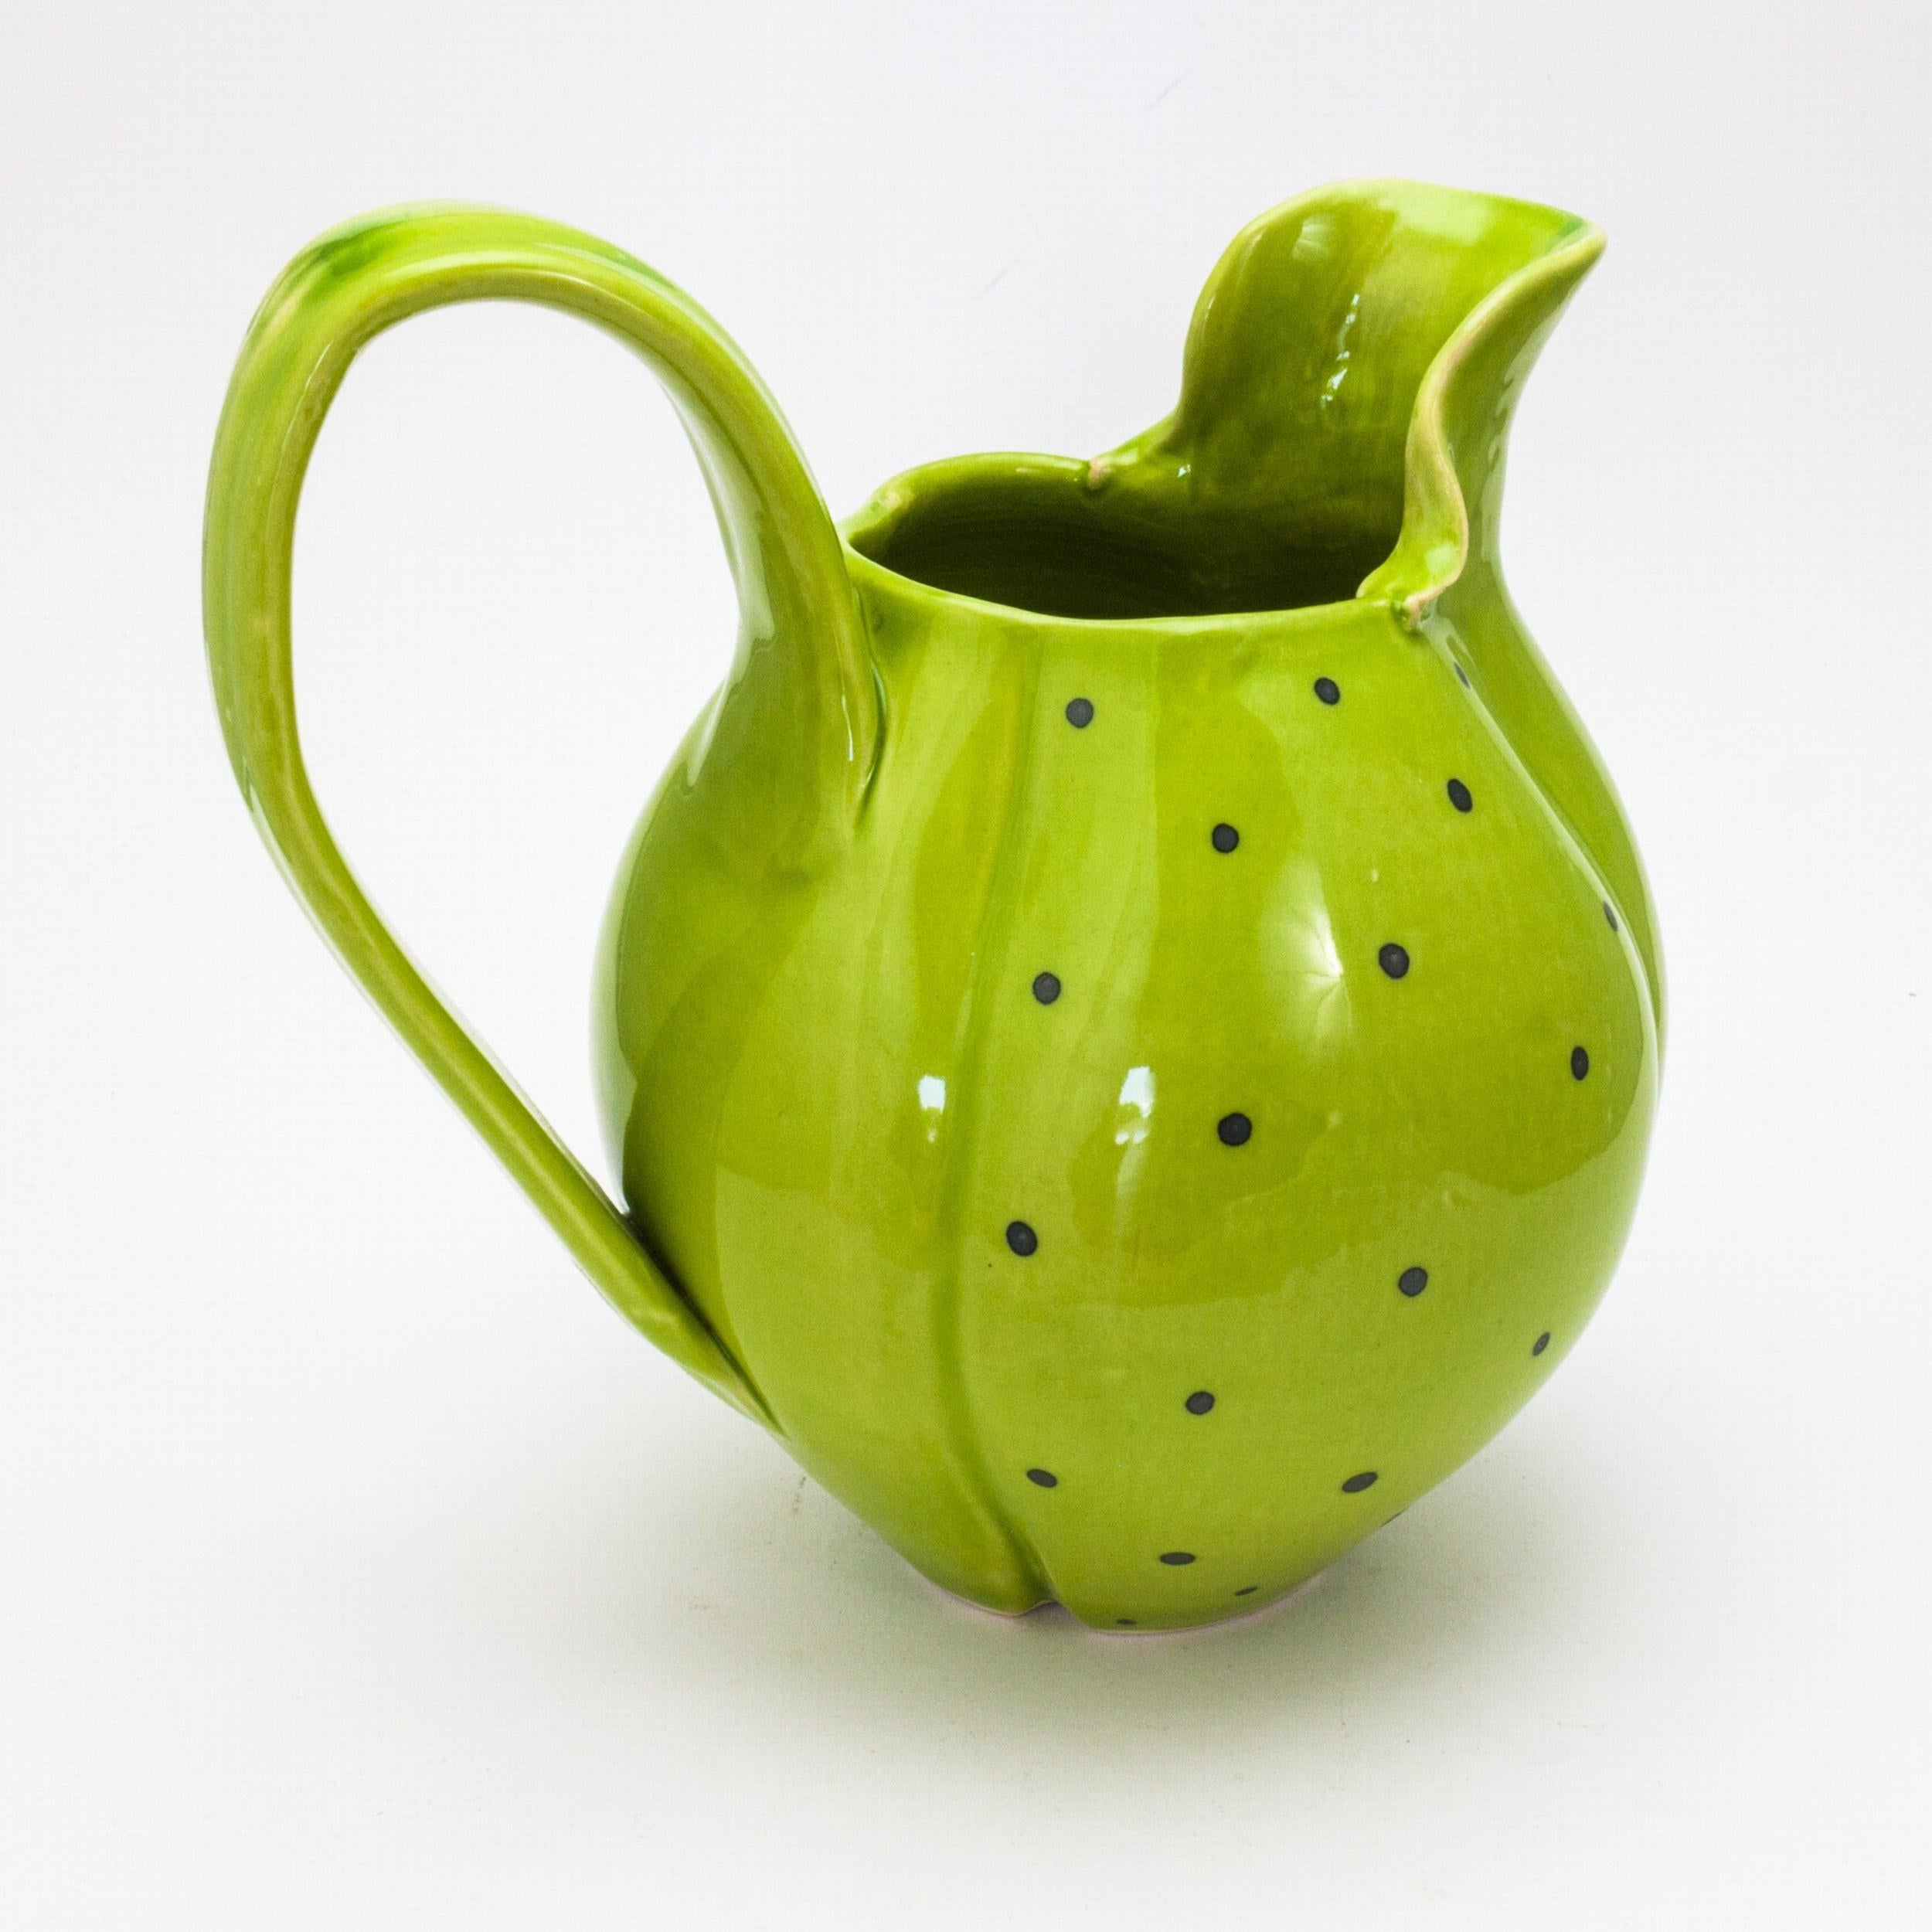 Green polka-dot Pitcher  - Contemporary Sculpture by Theresa Robinson